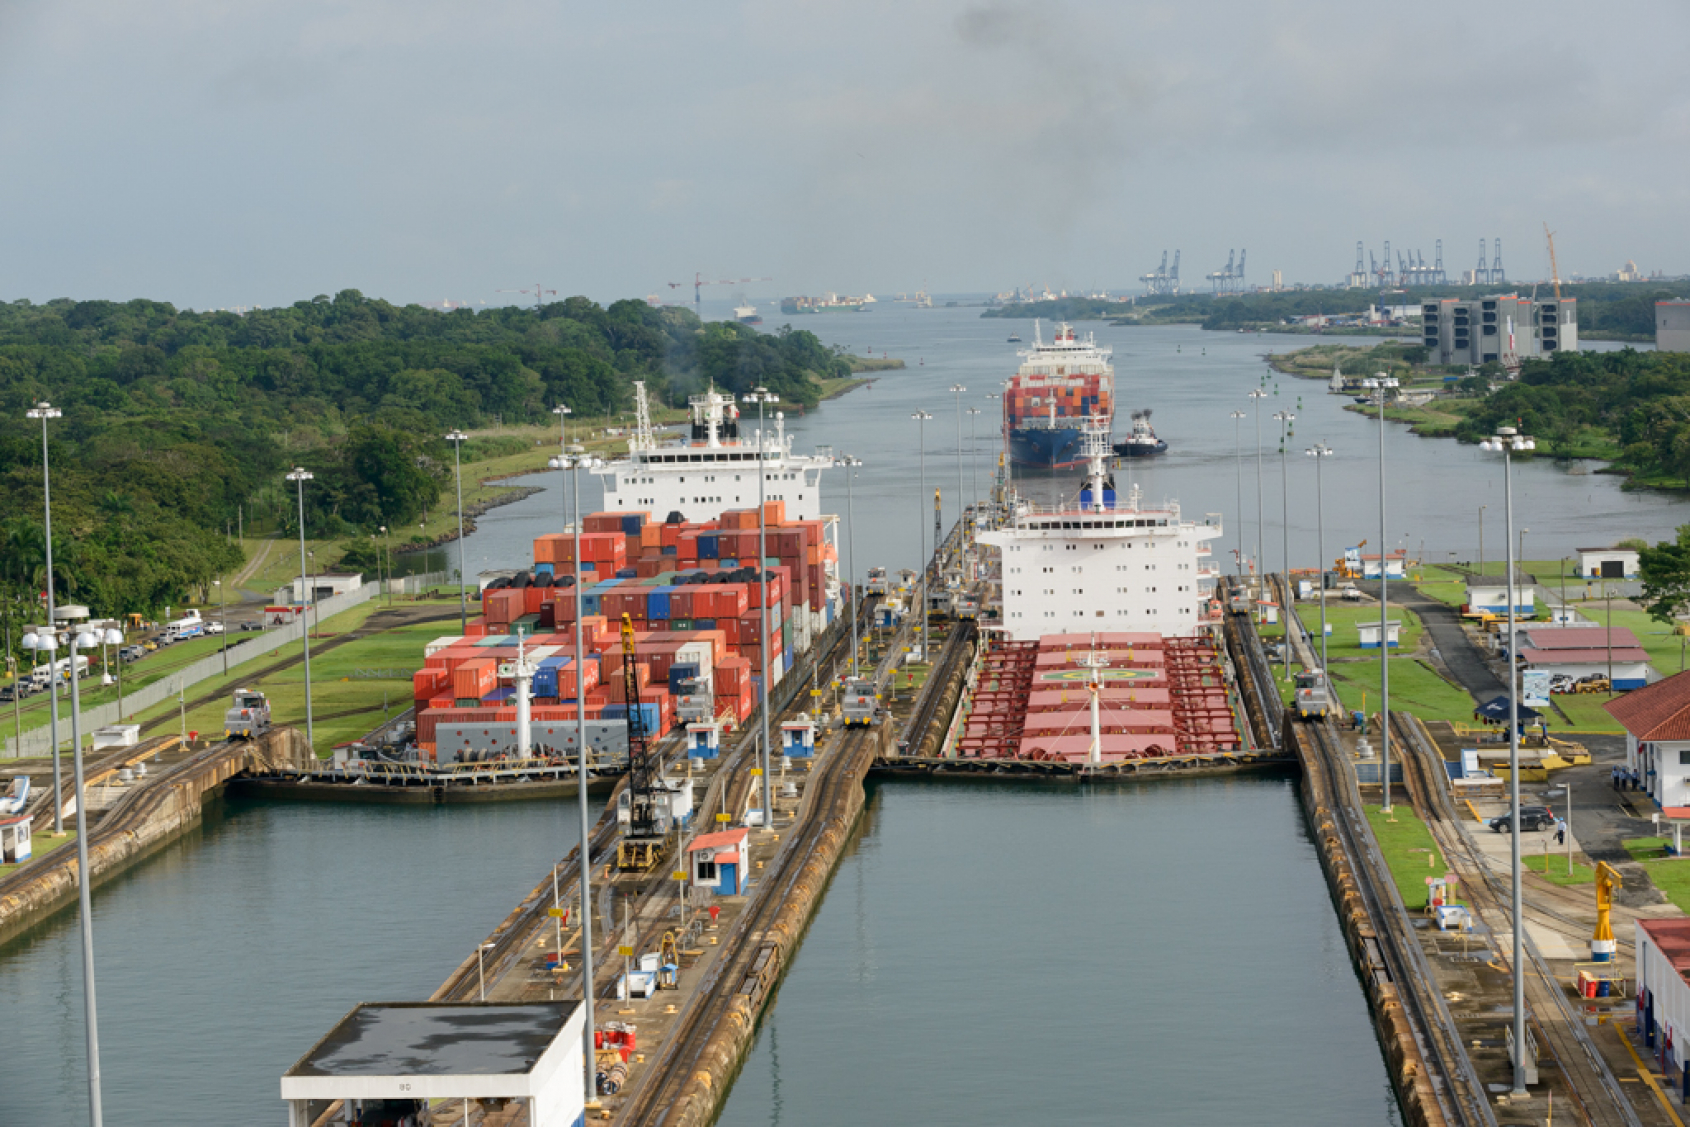 eBlue_economy_August 22nd - Panama Canal waiting time for non booked vessels (Days)